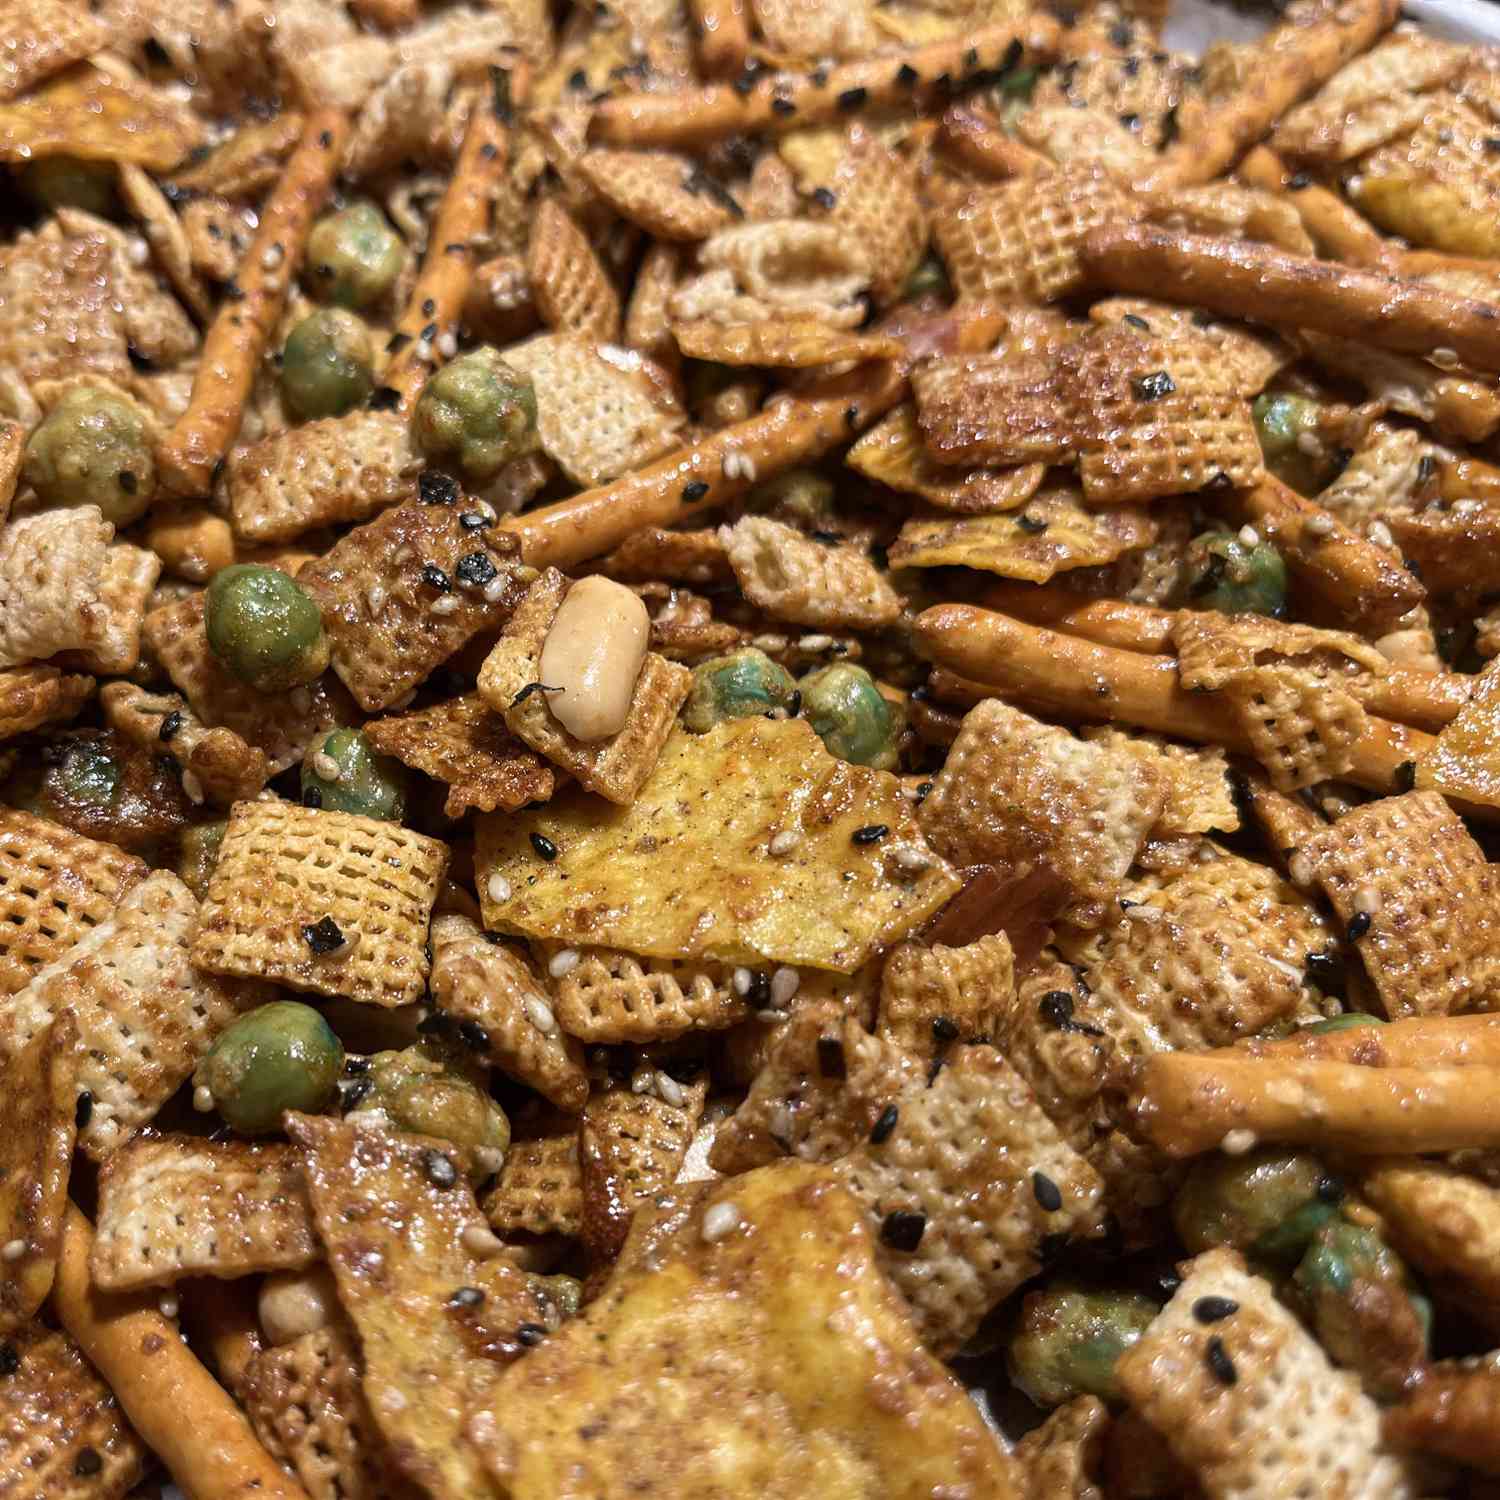 A jumble of golden brow Chex cereal, pretzel rods, nuts, and wasabi peas